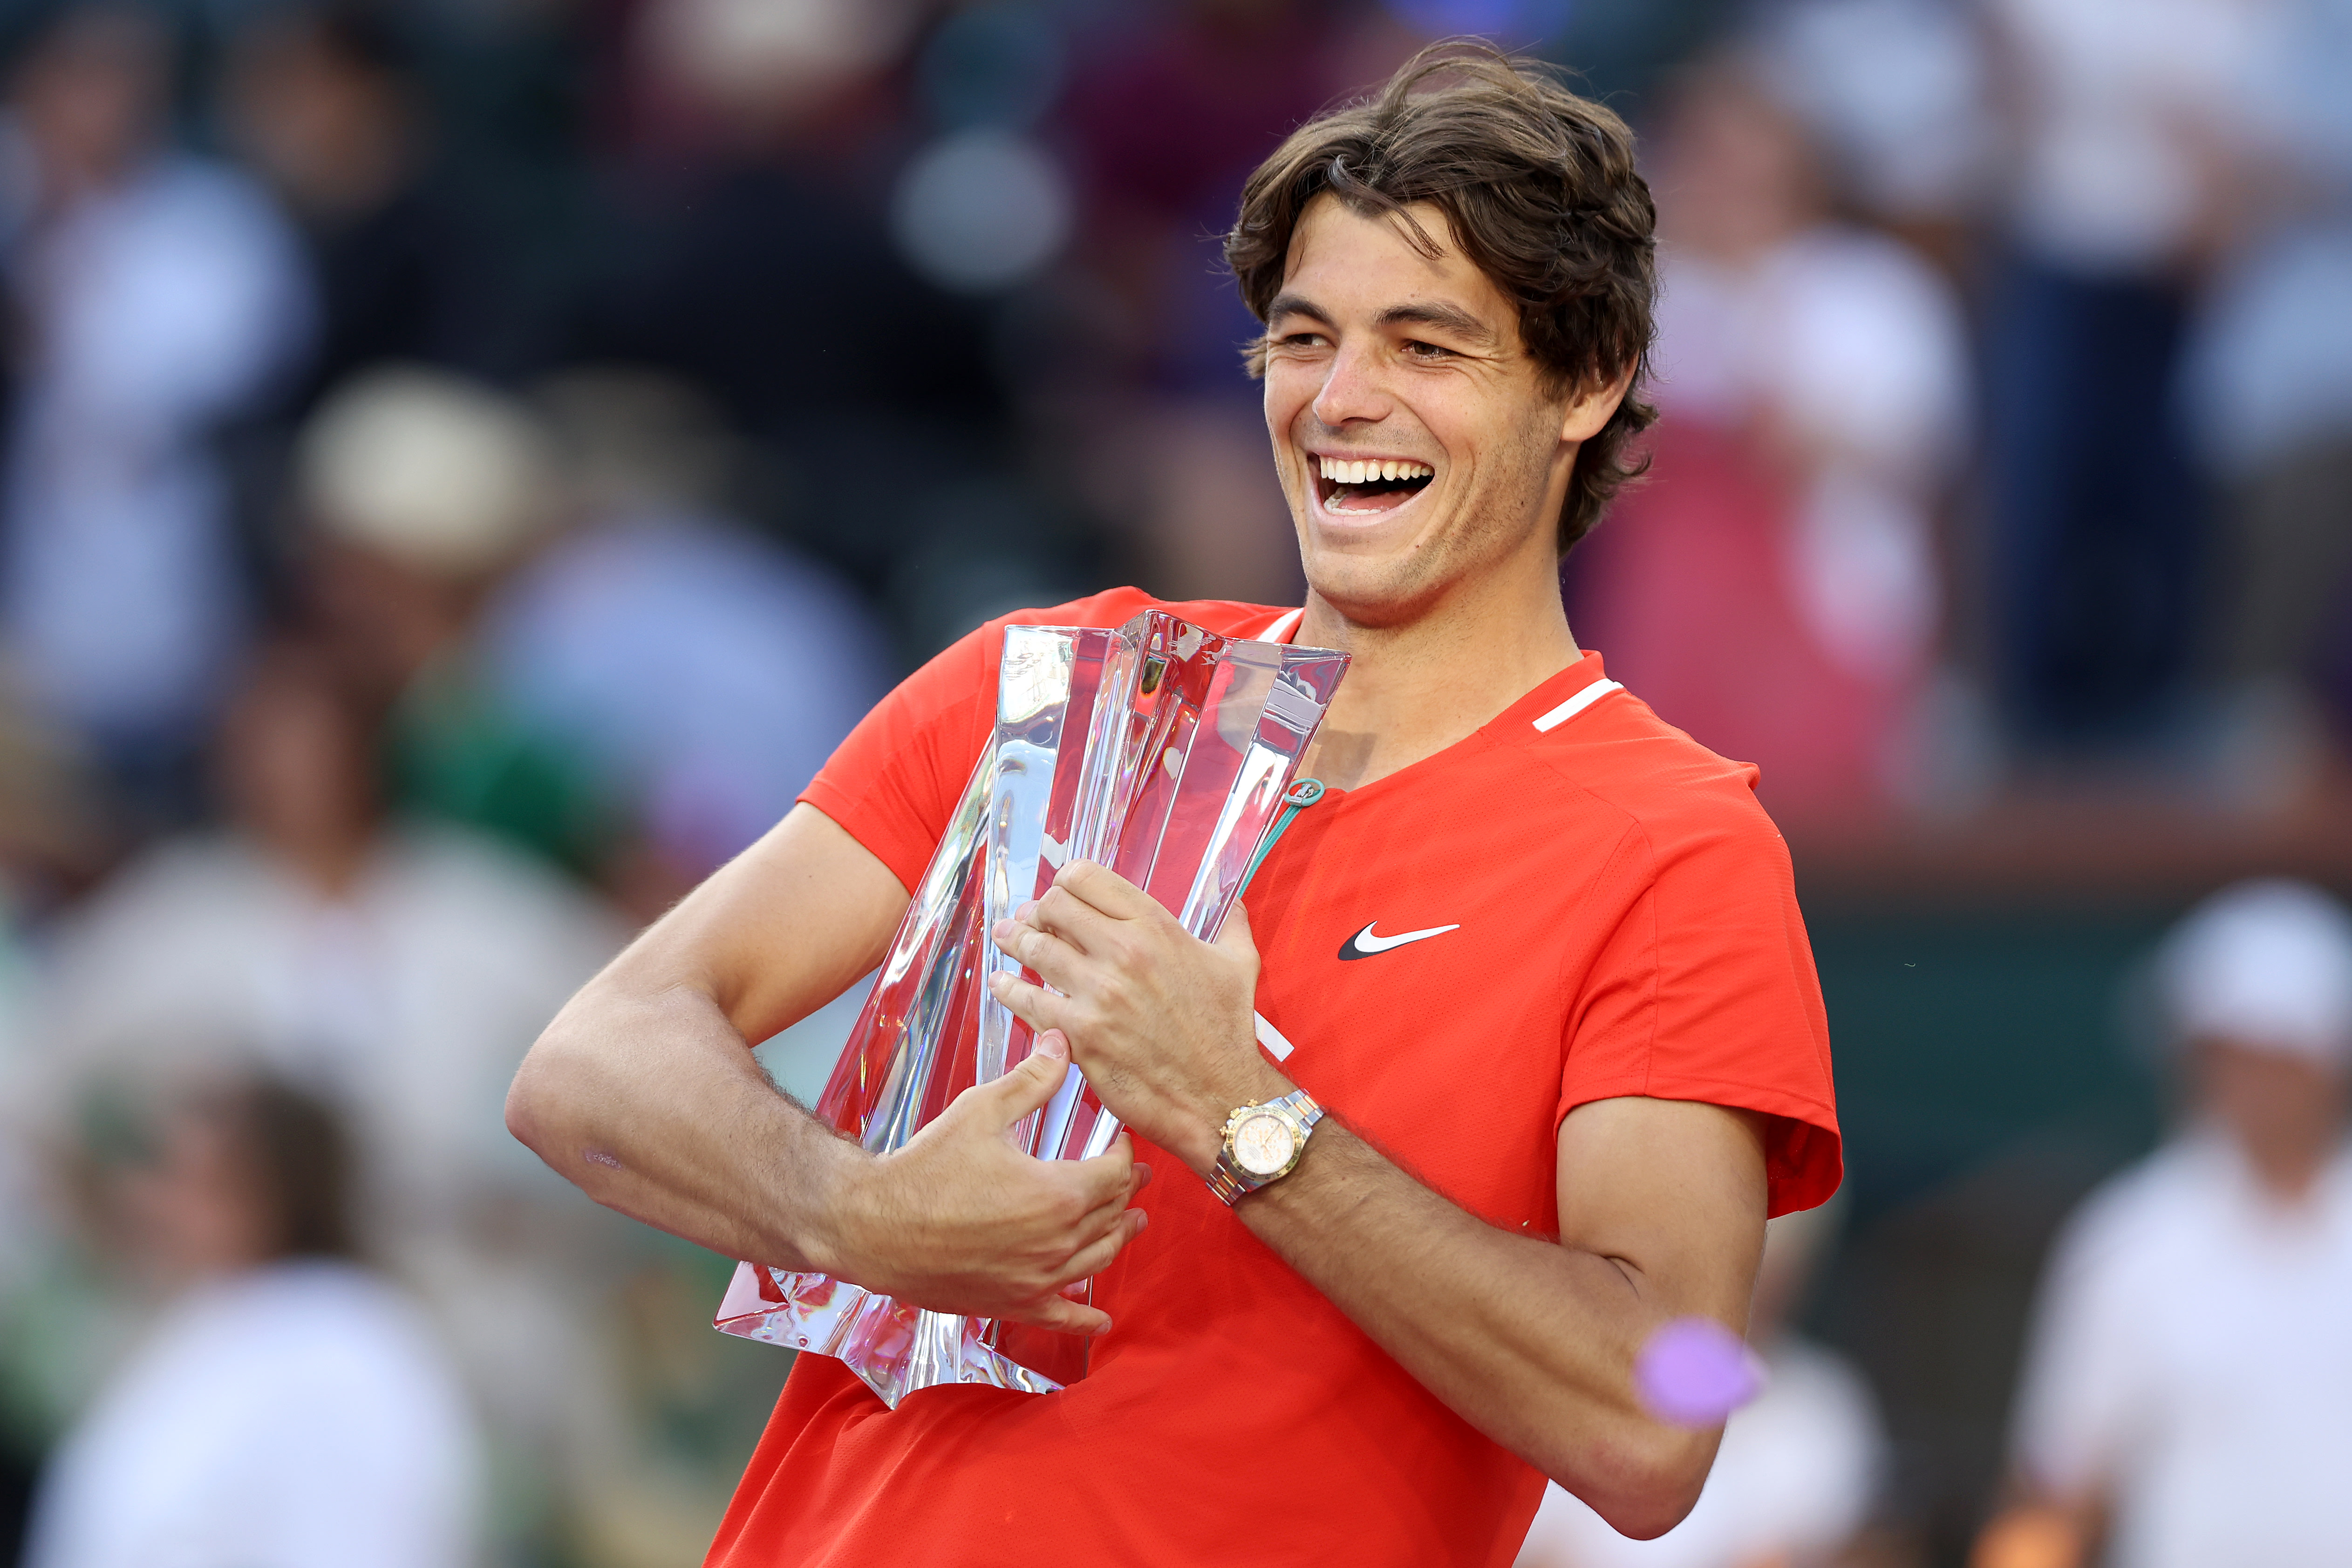 LIVE RANKINGS. Taylor Fritz to be the American no.1 after Indian